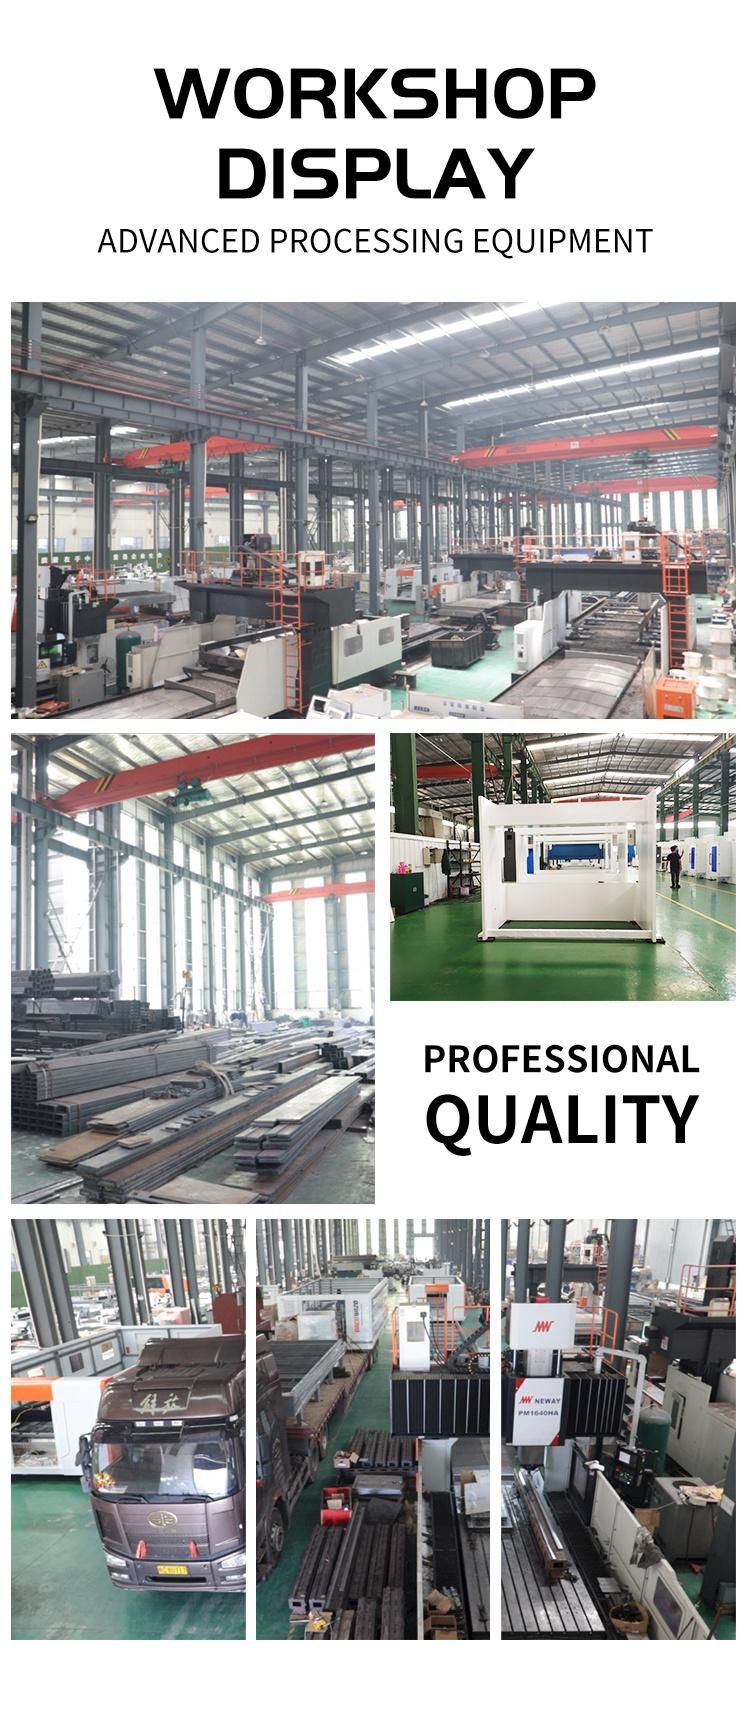 Njwg CNC Electro-Synchronized Hydraulic Stainless Steel Plate Bending Machine for Metal Bending